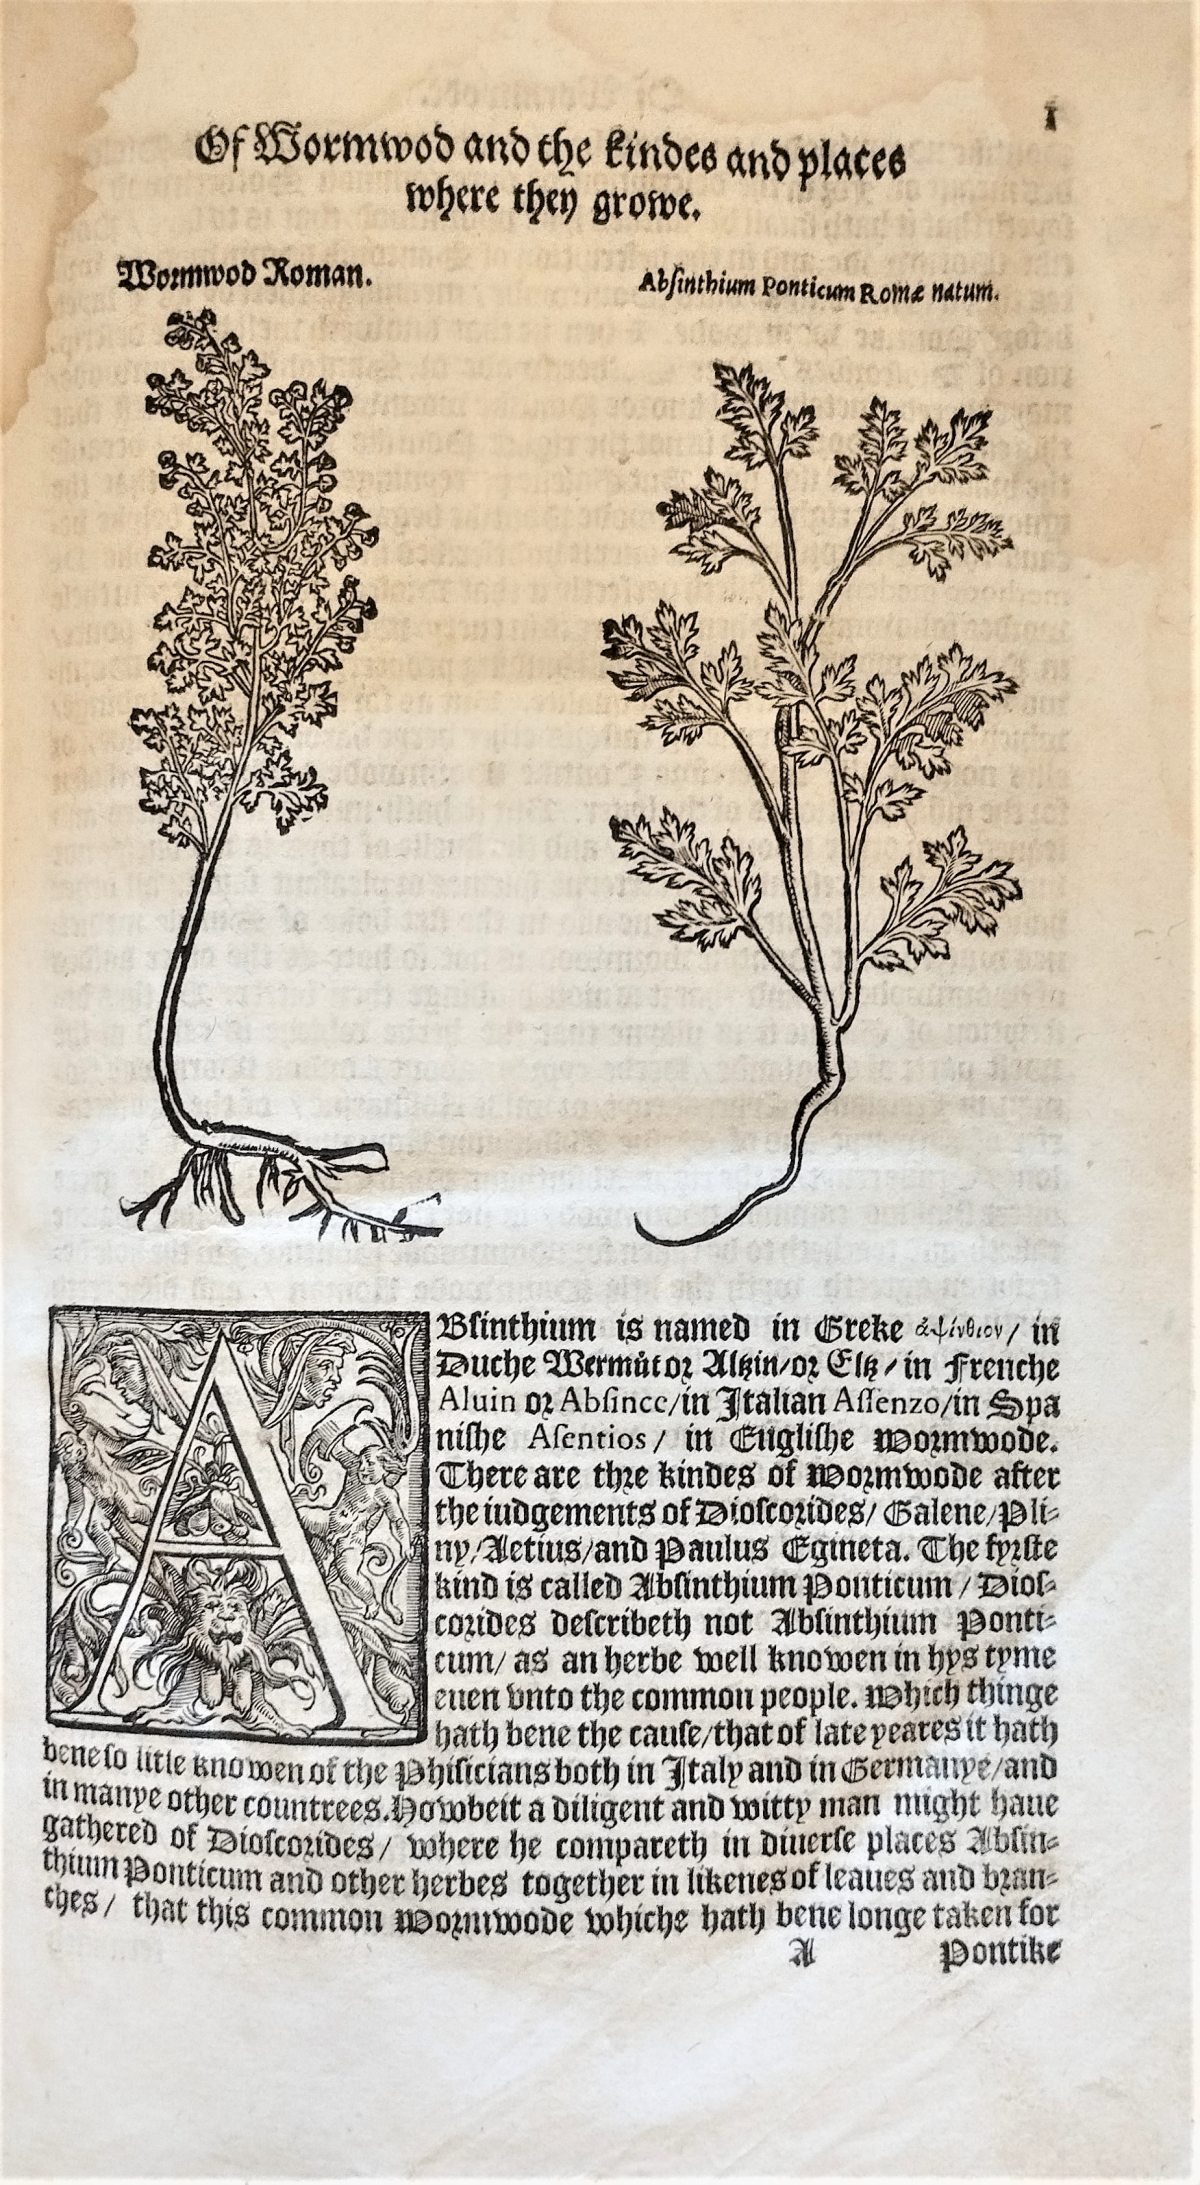 Page with the nomenclature, description and woodcuts illustration of the artemisia absinthium plant and flowers.